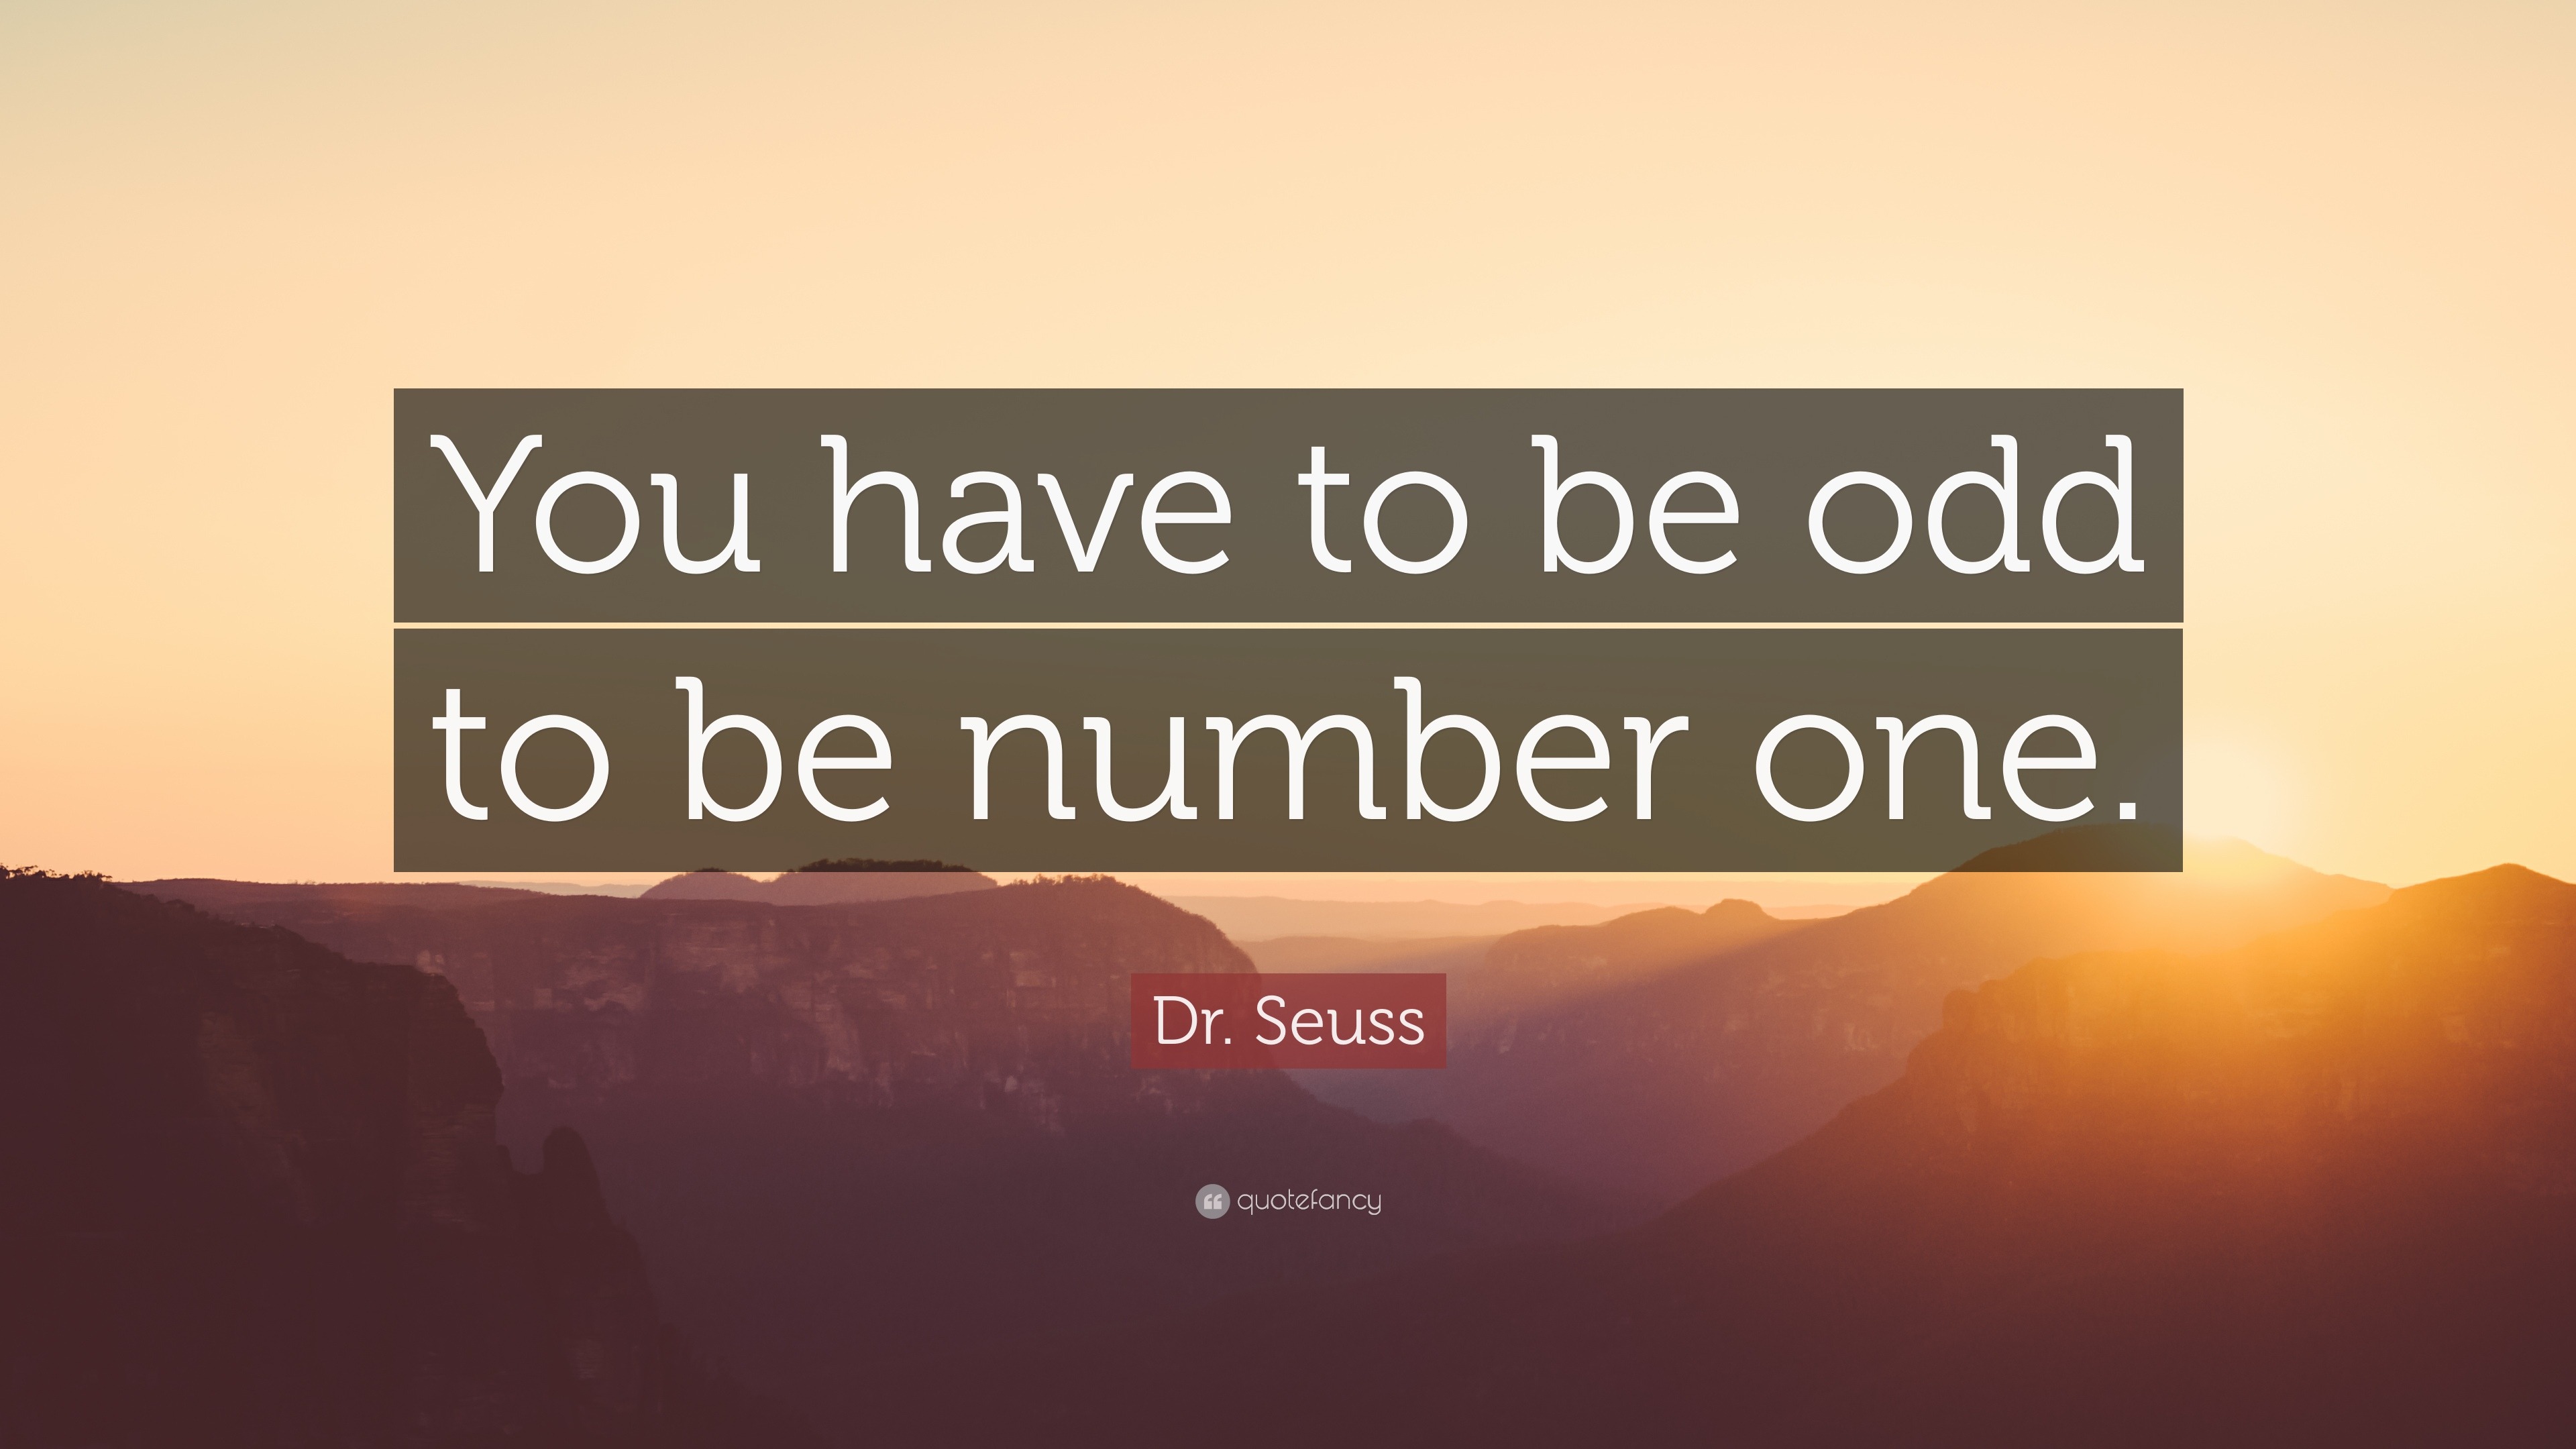 Dr. Seuss Quote: “You have to be odd to be number one.” (12 wallpapers